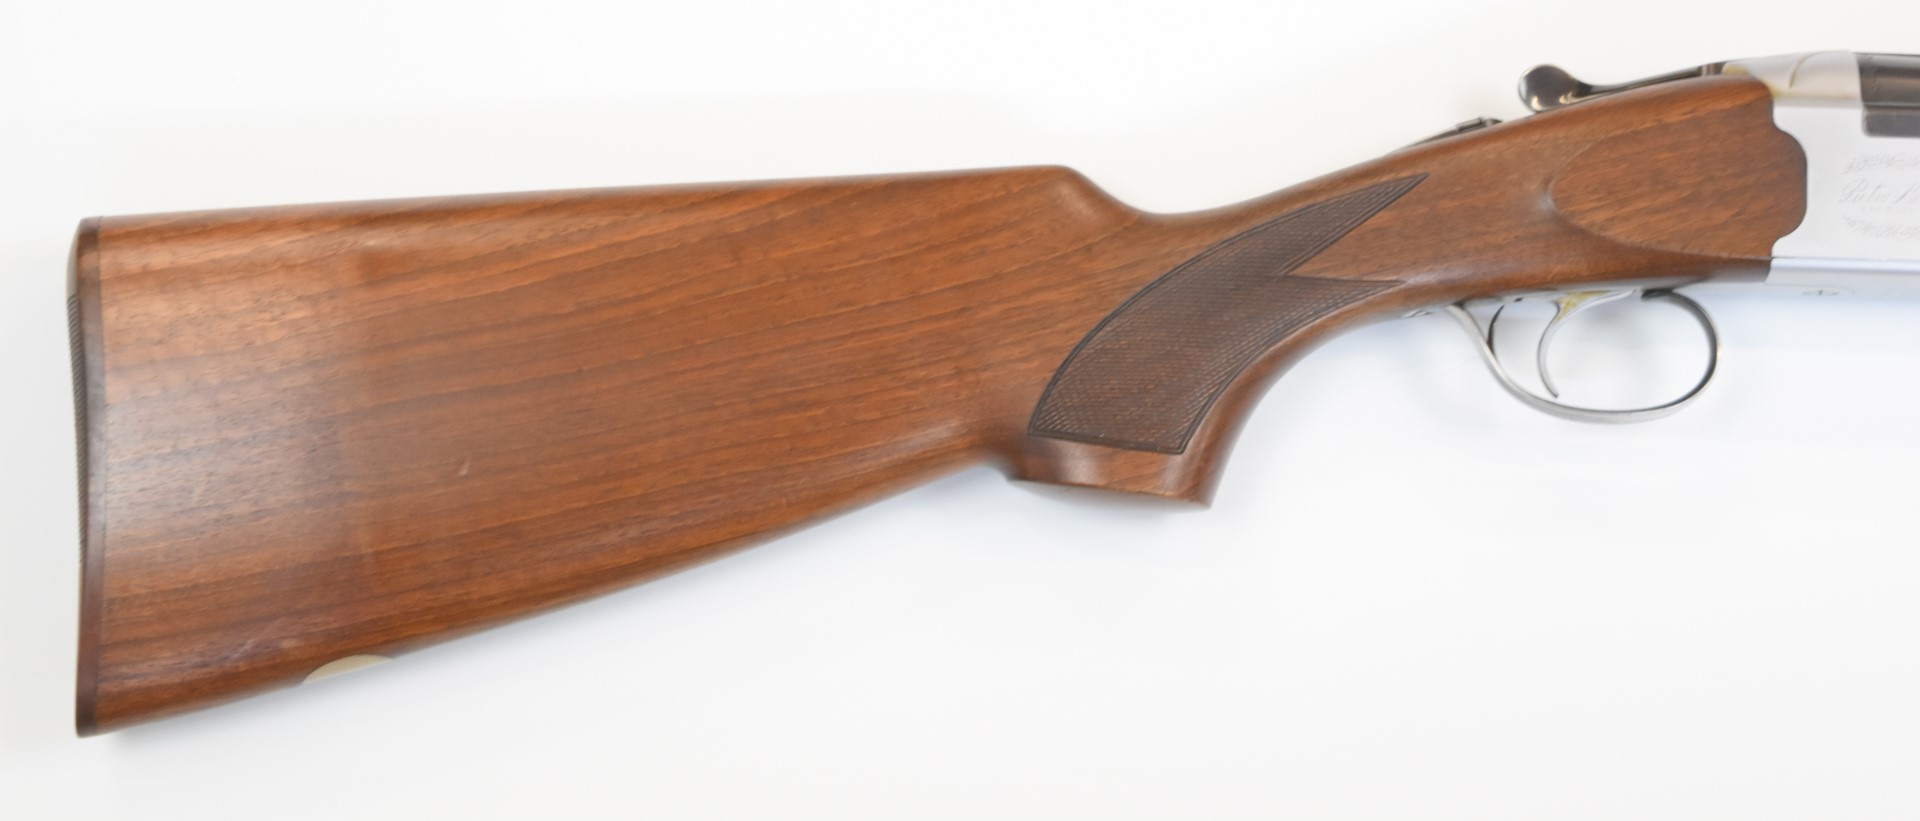 Beretta S685E 12 bore over and under ejector shotgun with engraved lock, underside, trigger guard, - Image 3 of 11